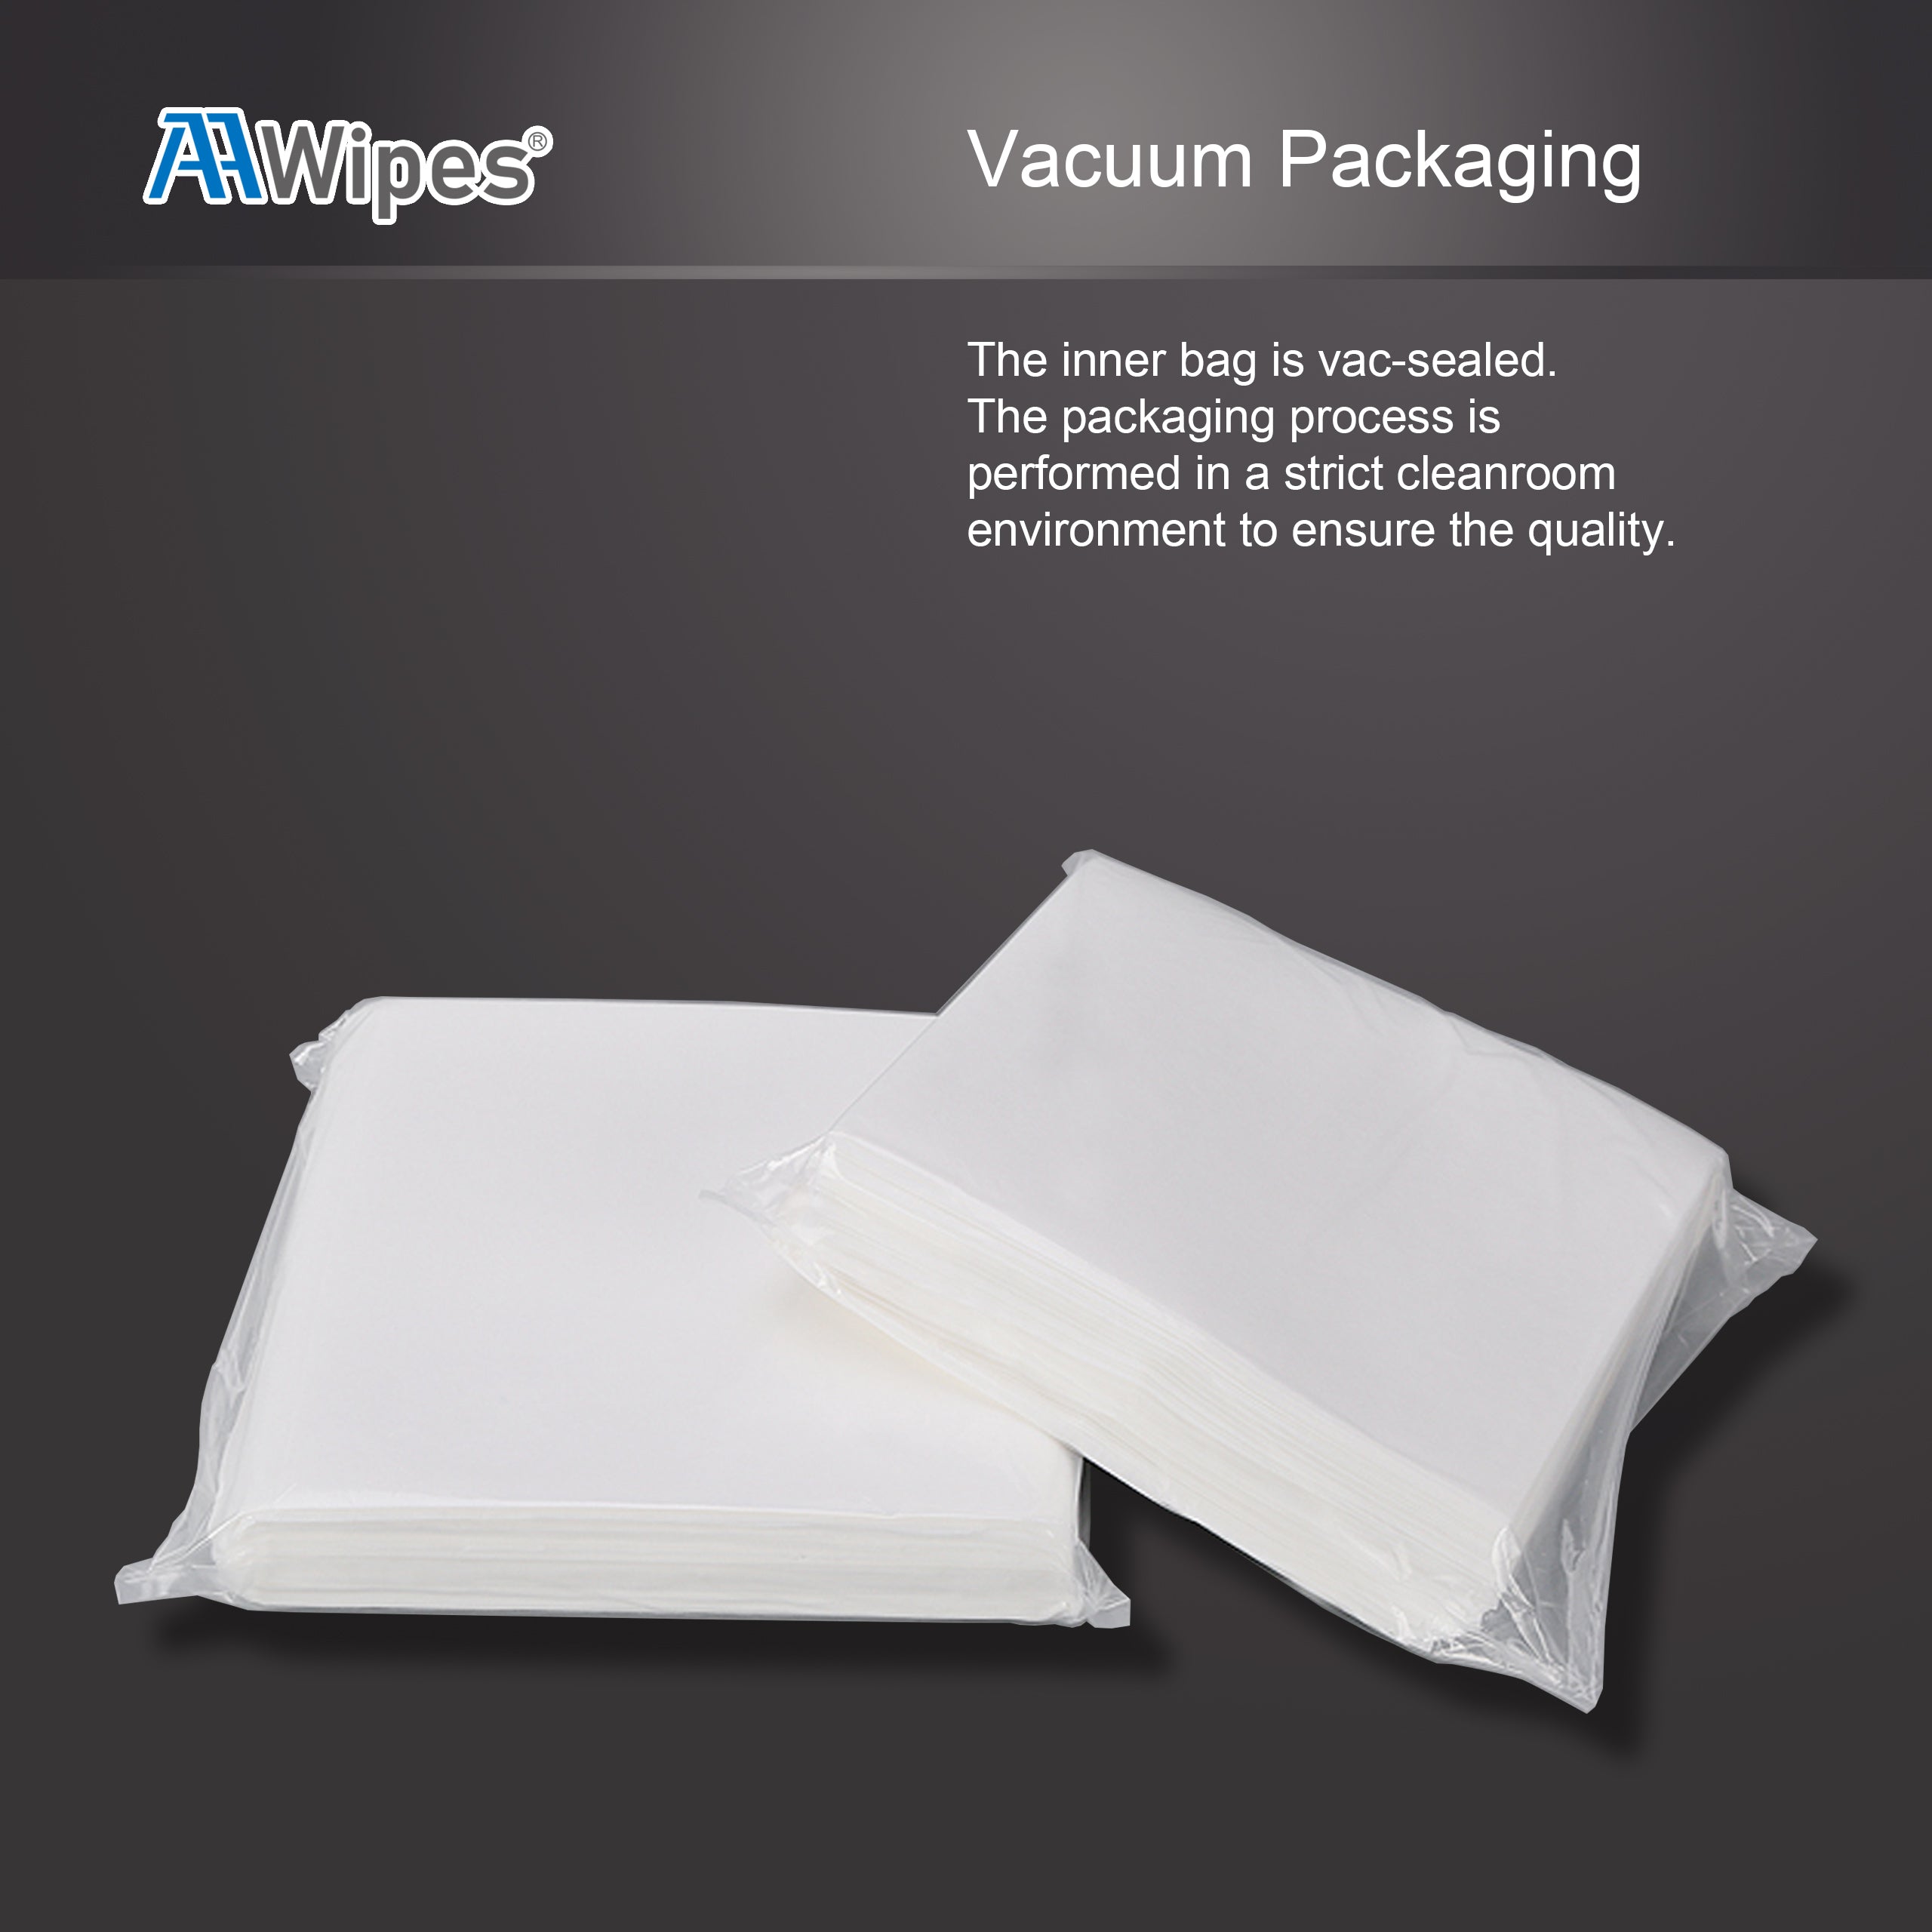 Nonwoven Wipes, Cellulose/Polyester Blend, 9" x 9" (Starting at 1 Box 3,600 Wipes per 12 Bags) (No. NW06809)